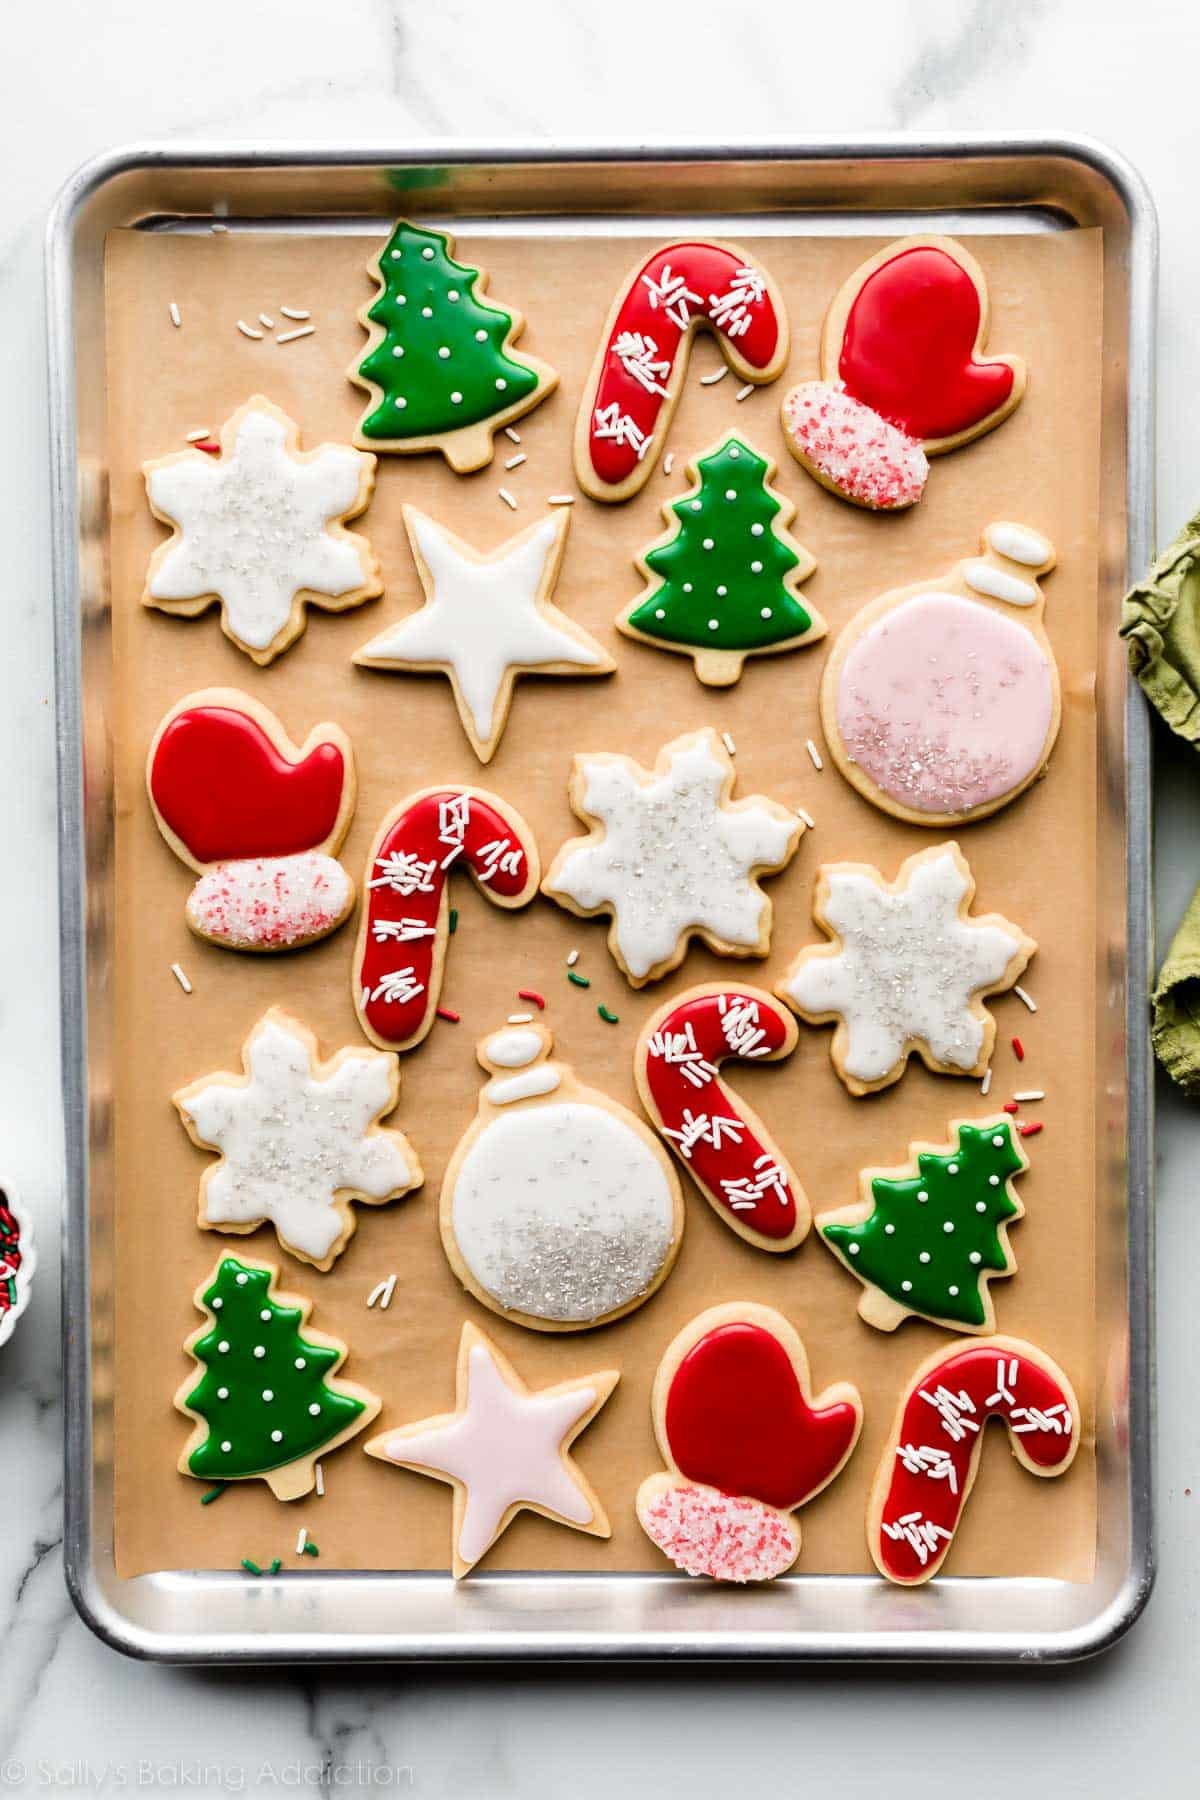 decorated Christmas sugar cookies including Christmas tree, red mittens and candy canes, ornaments, and snowflakes with icing.